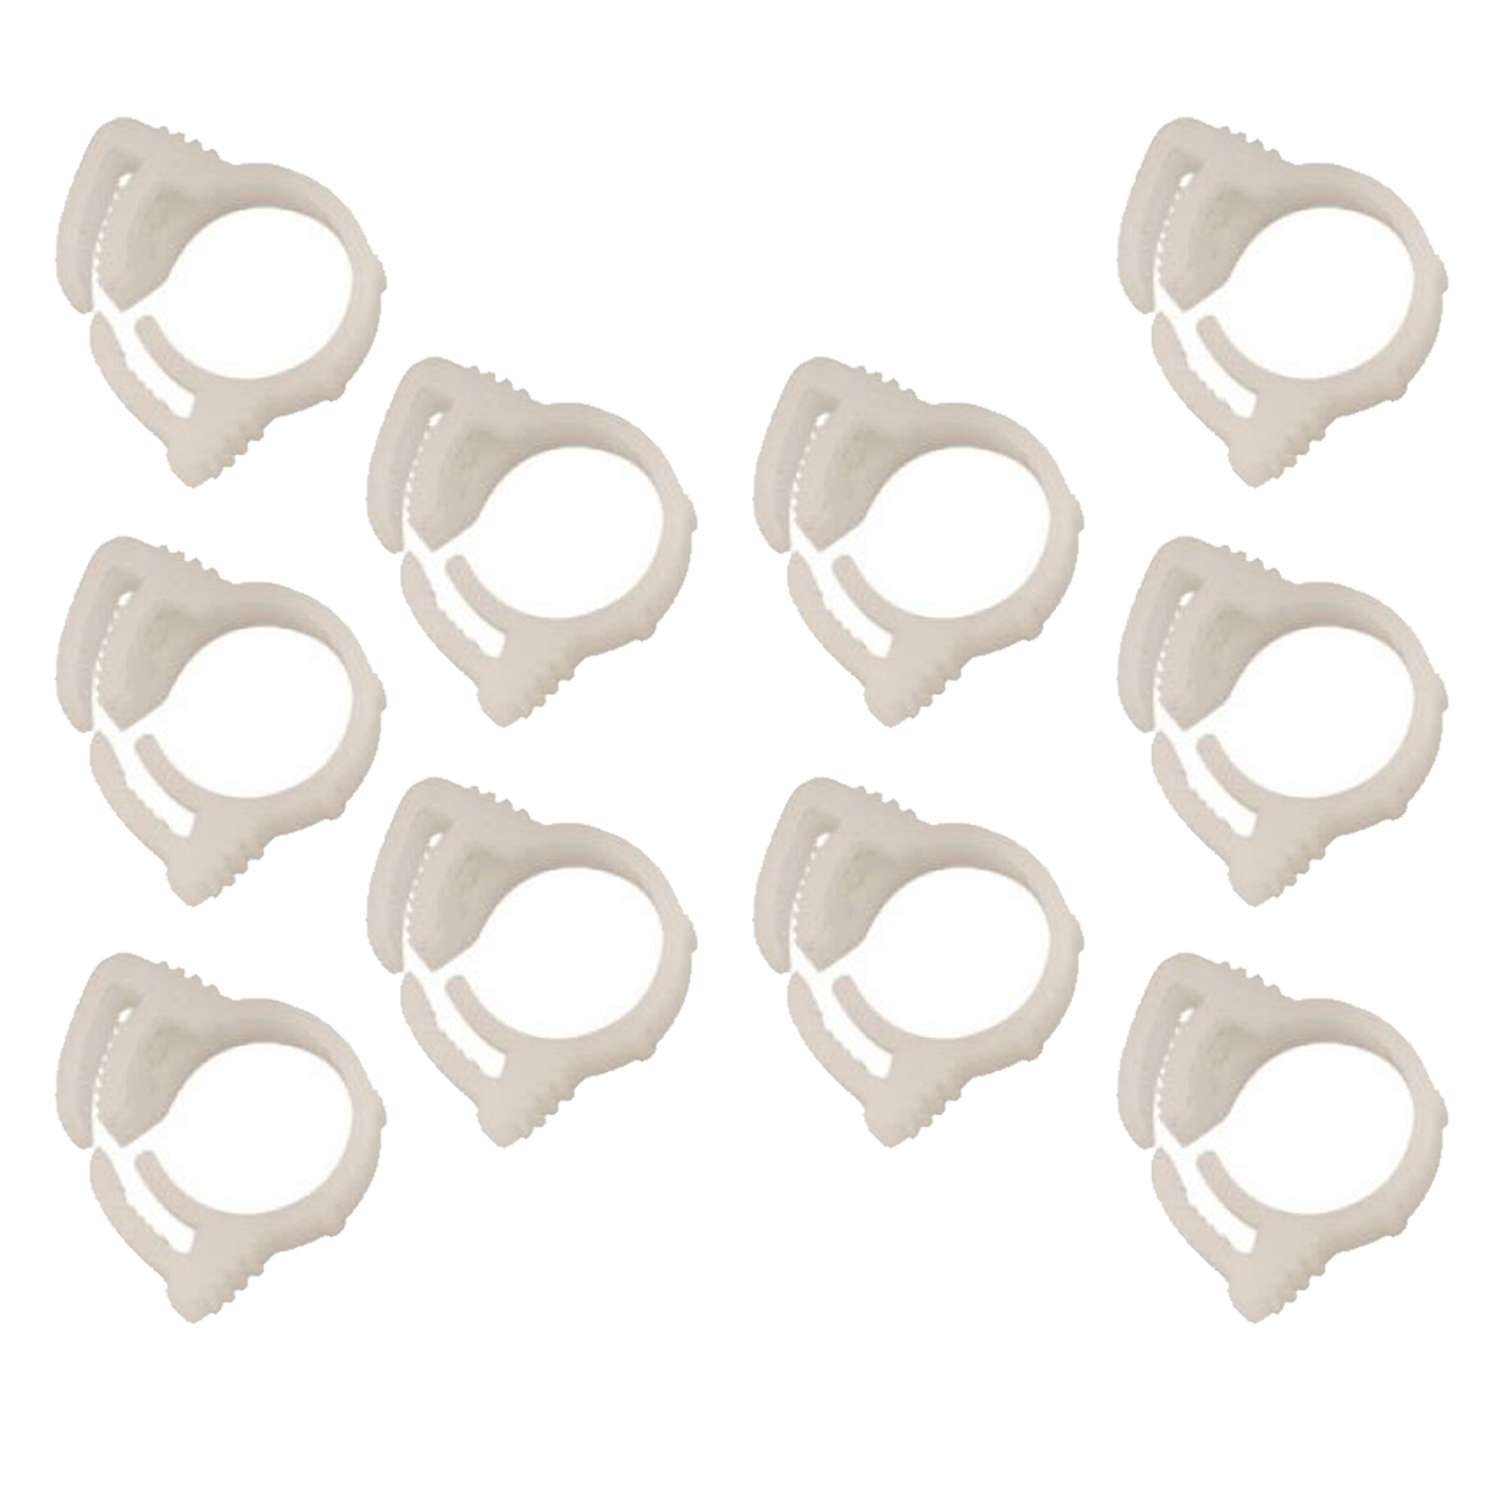 Pack of 10 Reusable Plastic Snap Clamps for 3/16